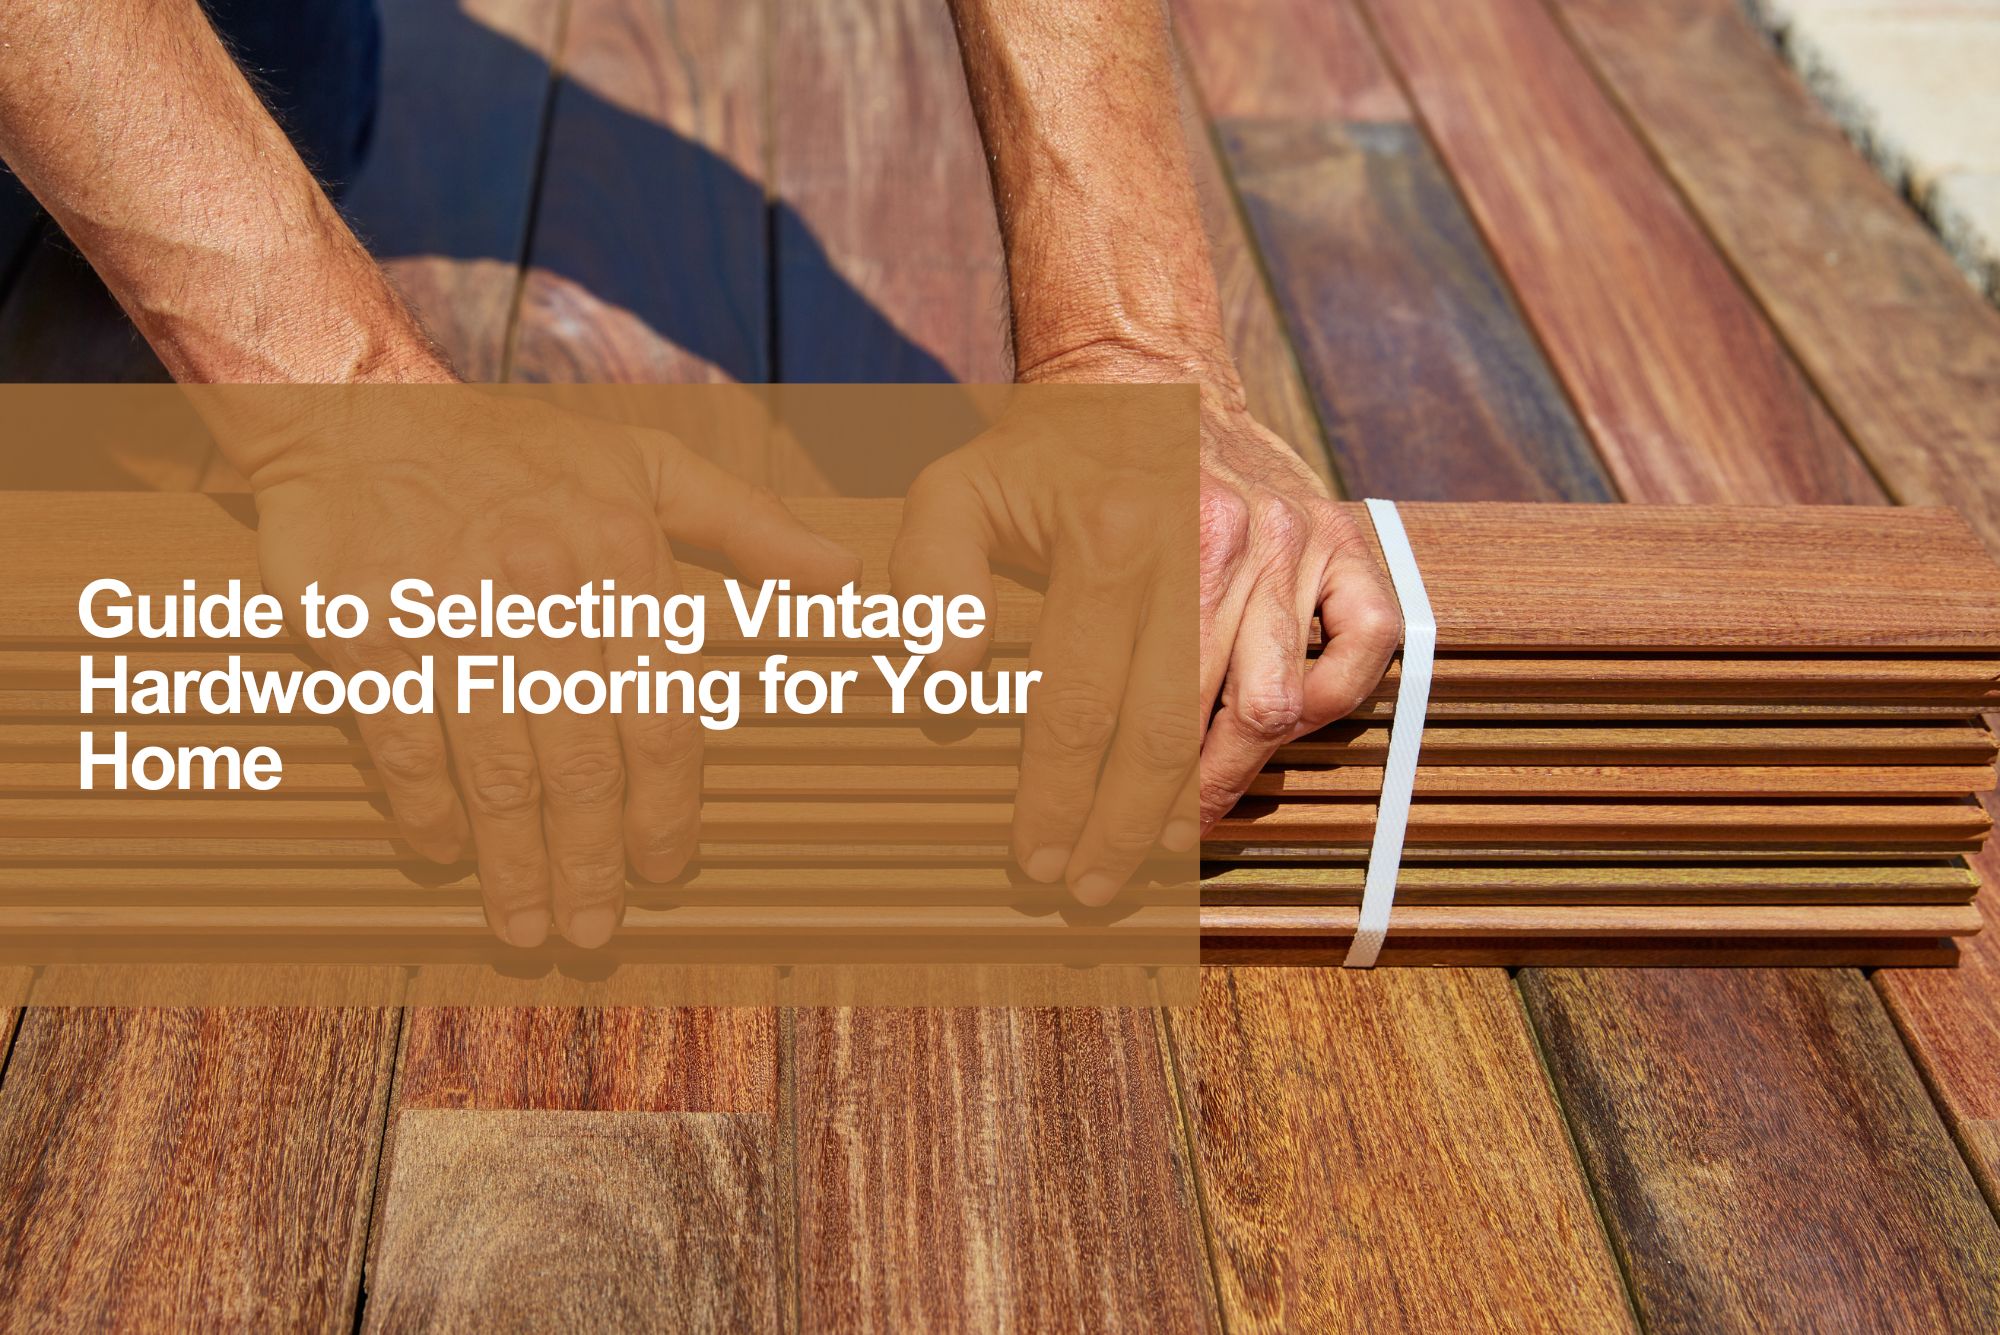 Guide to Selecting Vintage Hardwood Flooring for Your Home